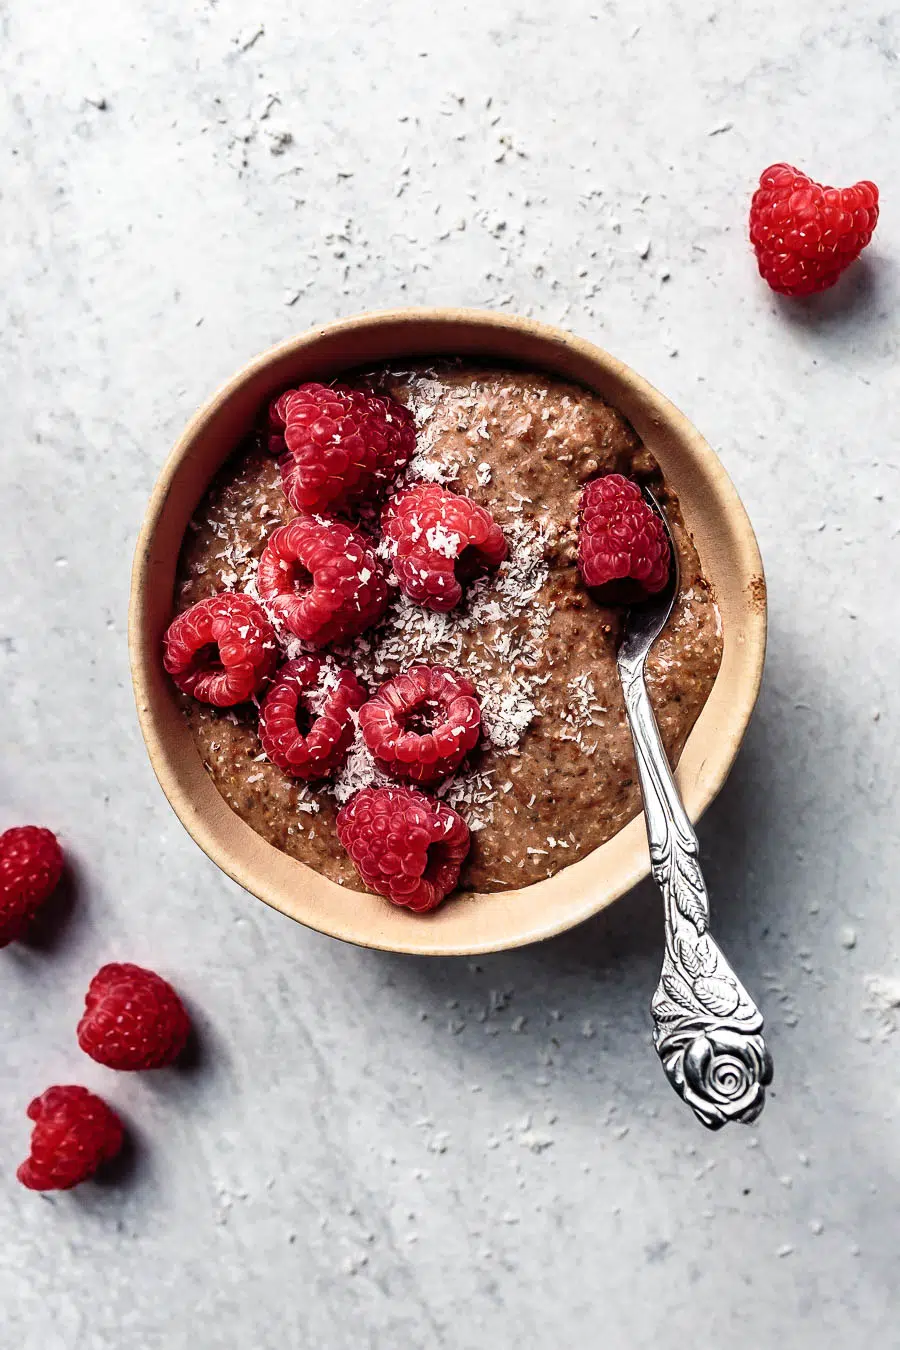 Birds eye view of blended chocolate chia pudding in a clay bowl on a white counter top. The pudding is topped with raspberries and desiccated coconut. There is a silver spoon sitting inside the bowl and 2 stray raspberries on the counter top.